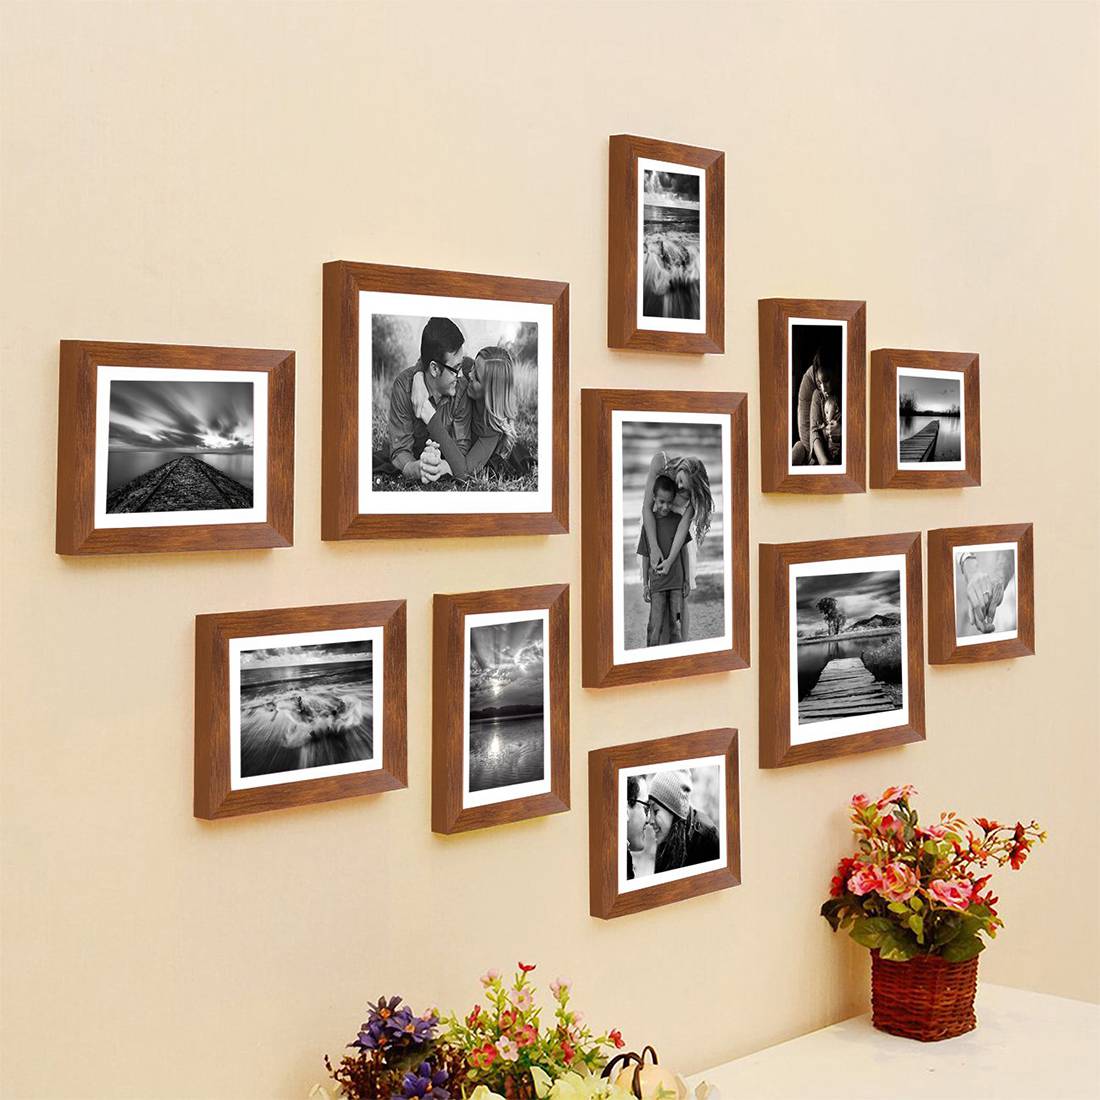 Art Street Set of 7 Adore Wall Photo frame Home-office Room Decor(White,11x14,8x10,8x6,8x8,5x5  In): Buy Art Street Set of 7 Adore Wall Photo frame Home-office Room Decor(White,11x14,8x10,8x6,8x8,5x5  In) Online at Best Price in